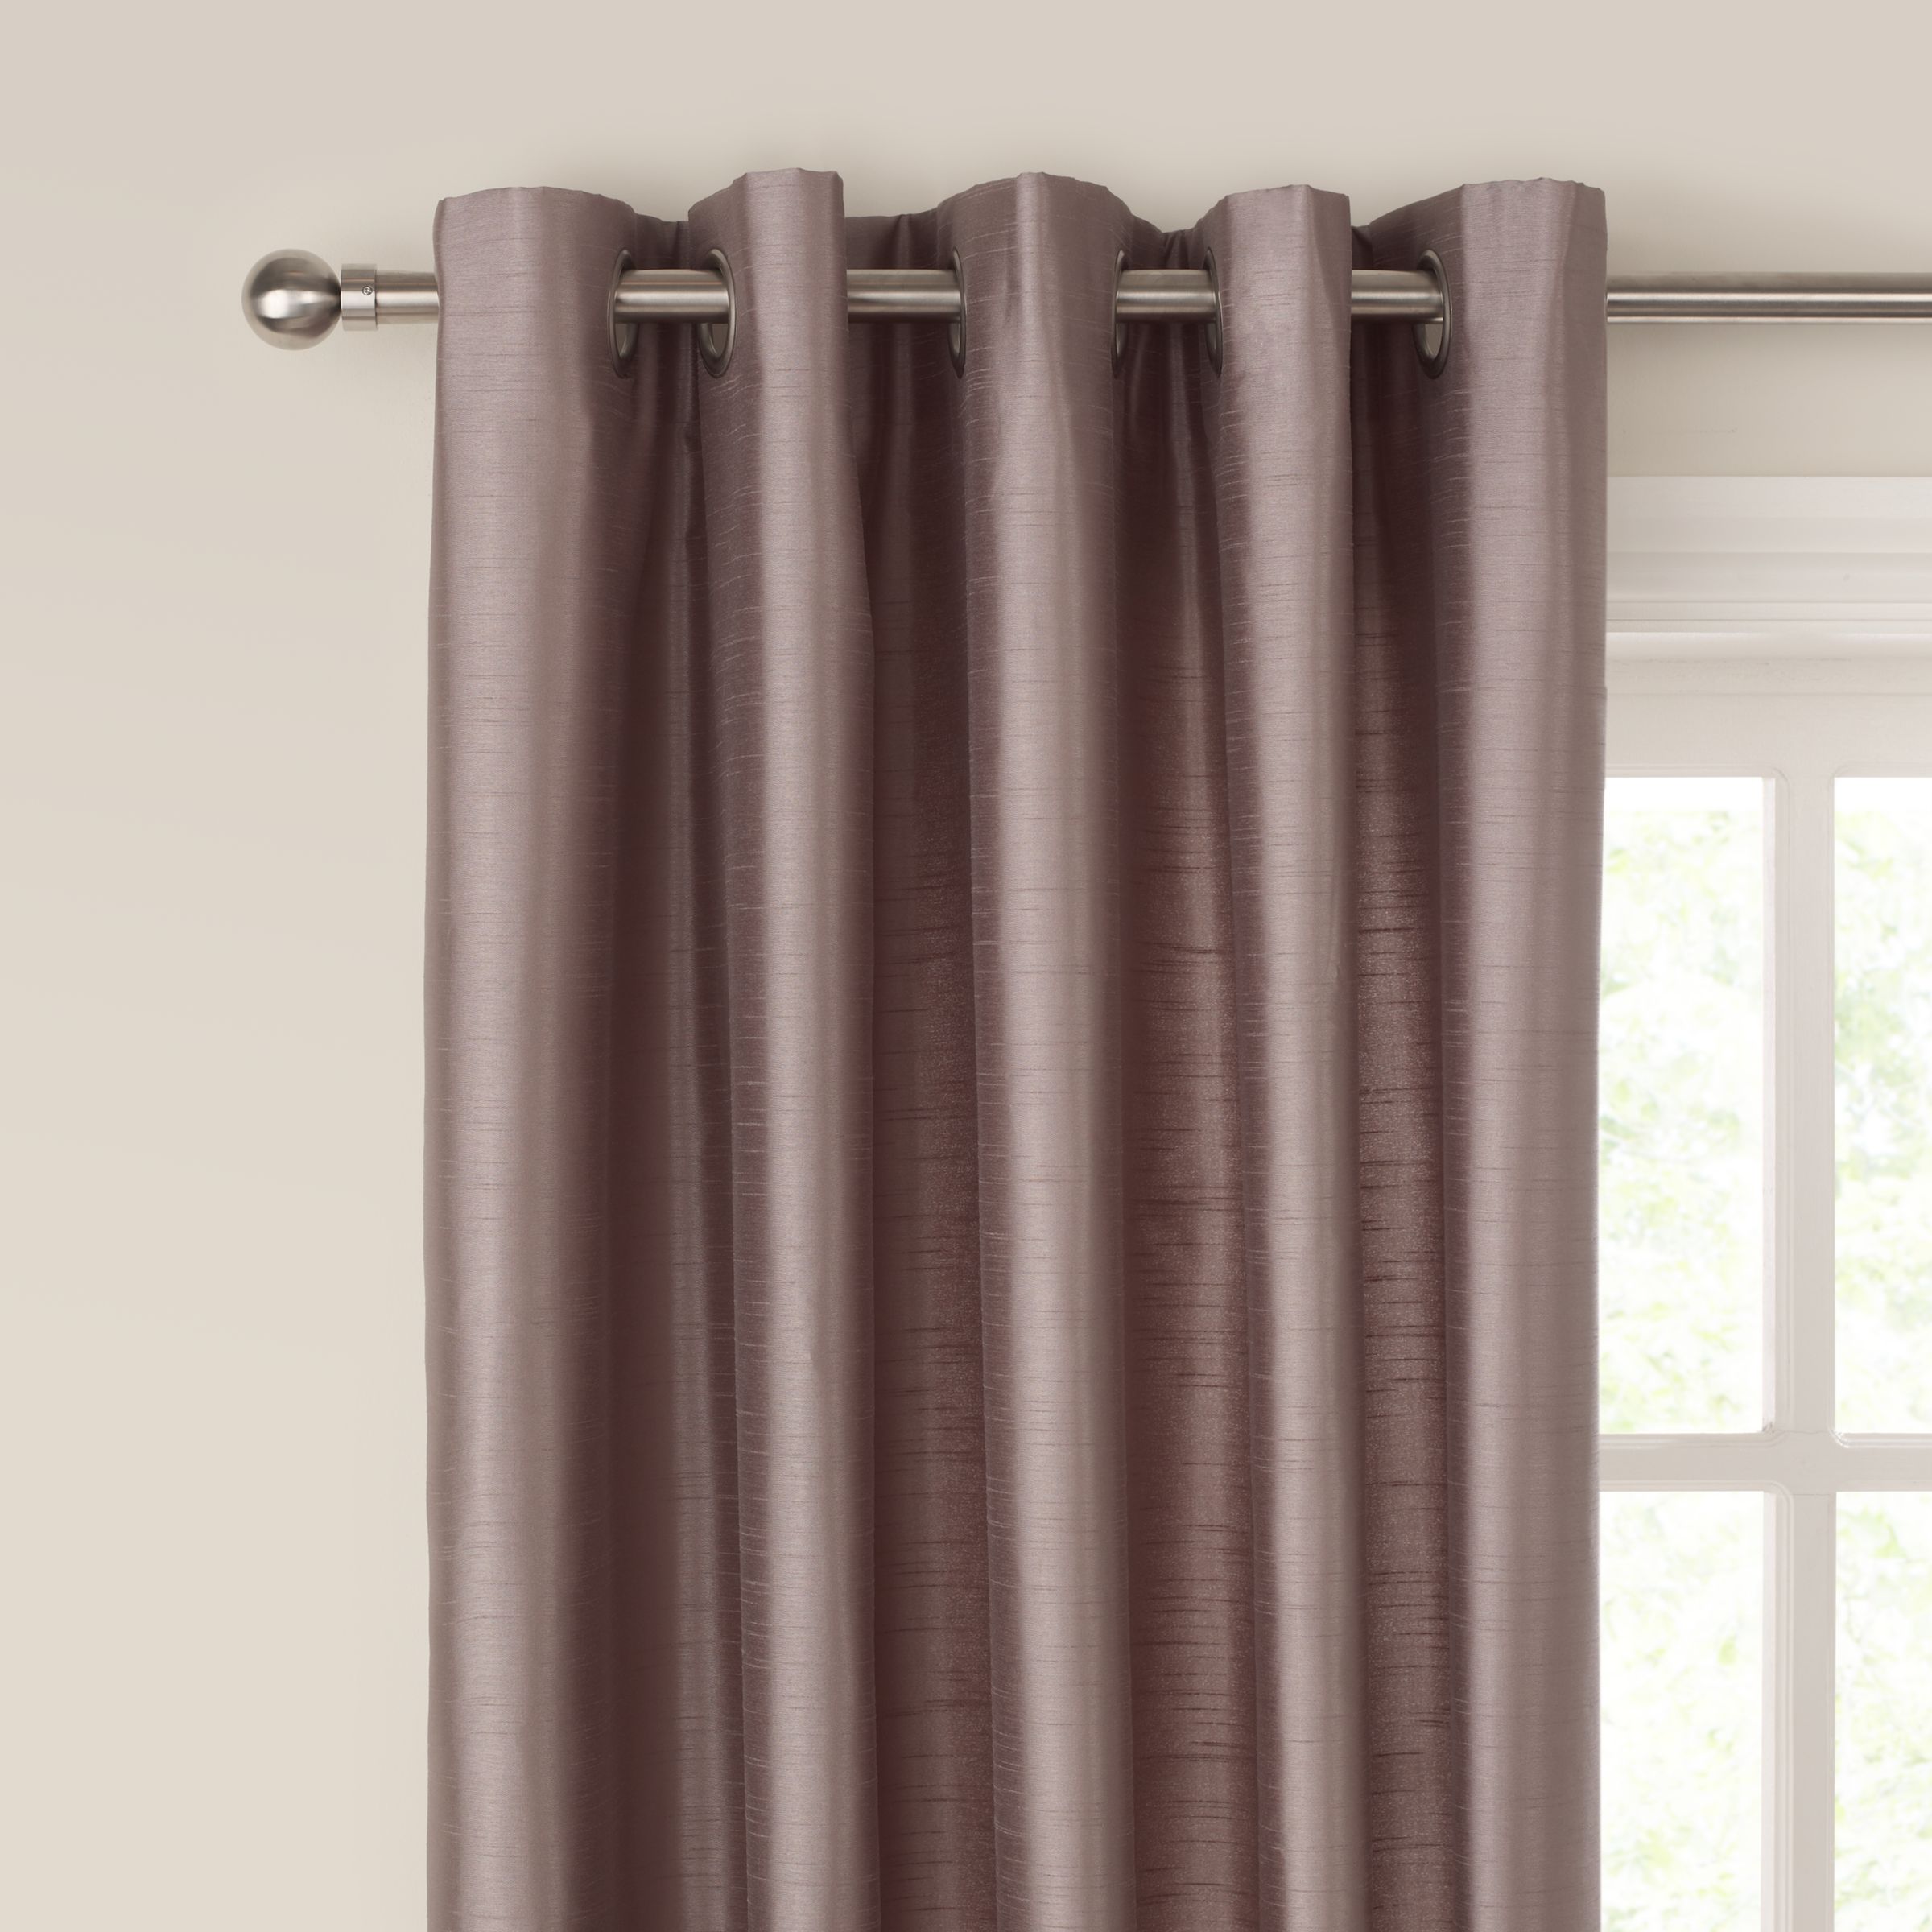 John Lewis Grace Lined Eyelet Curtains, Pale